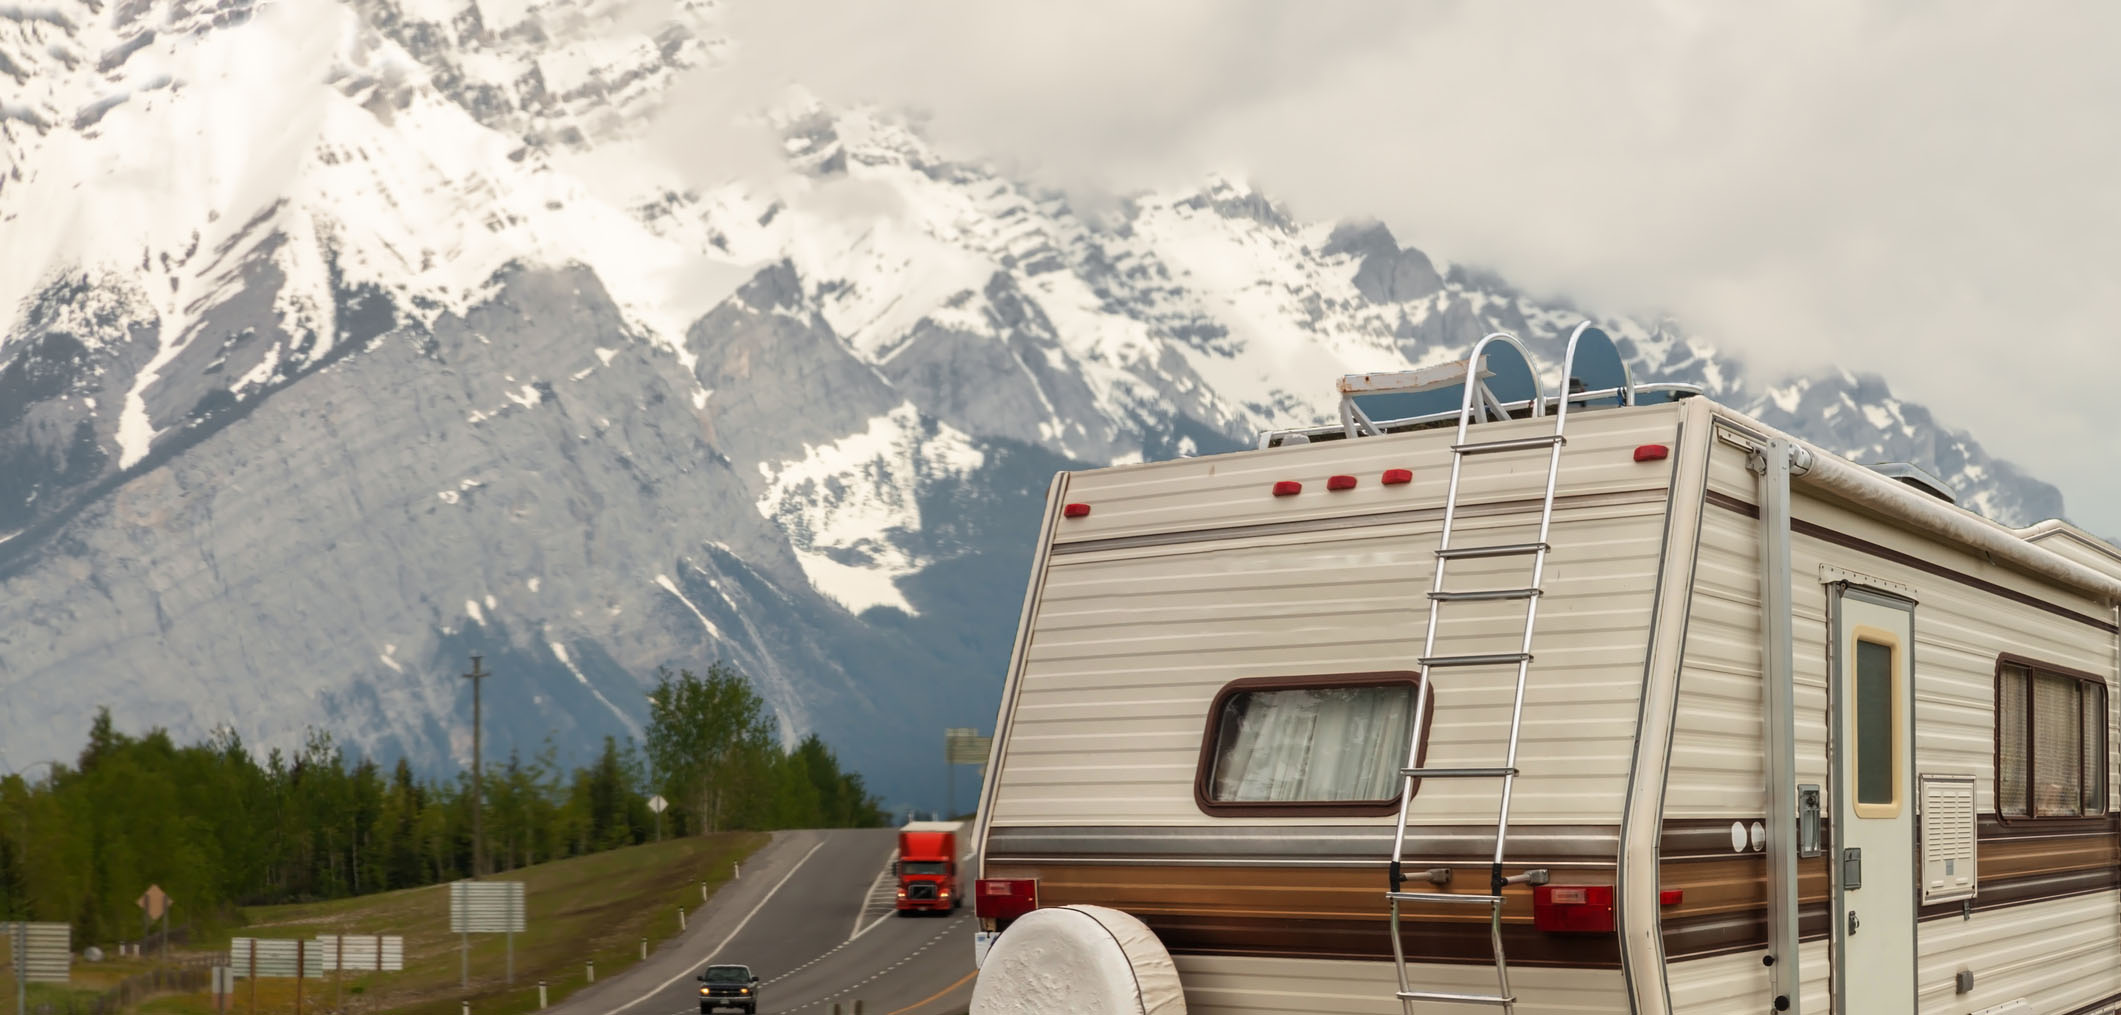 Travel Trailer with snowy mountain in background.